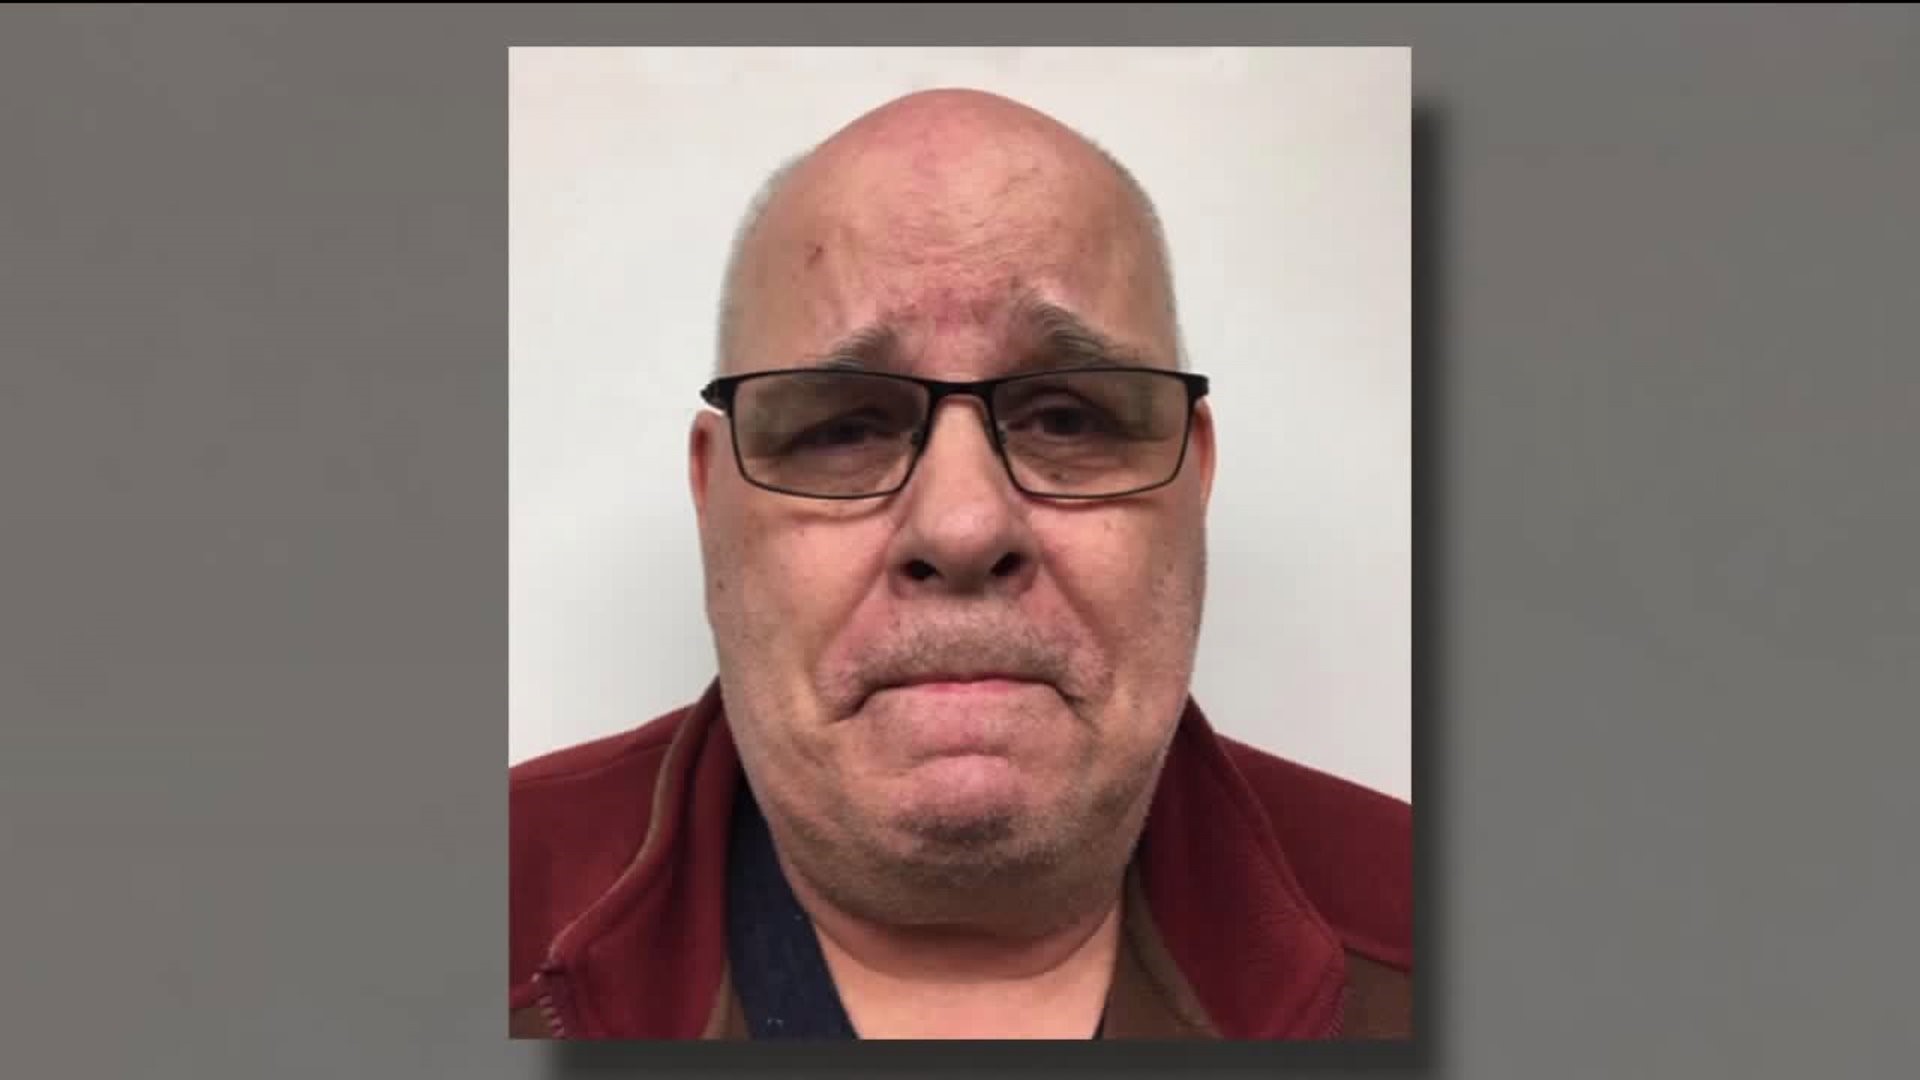 Middle School Porn - Middle School Basketball Coach, Retired Teacher Faces Child Porn Charges |  wnep.com